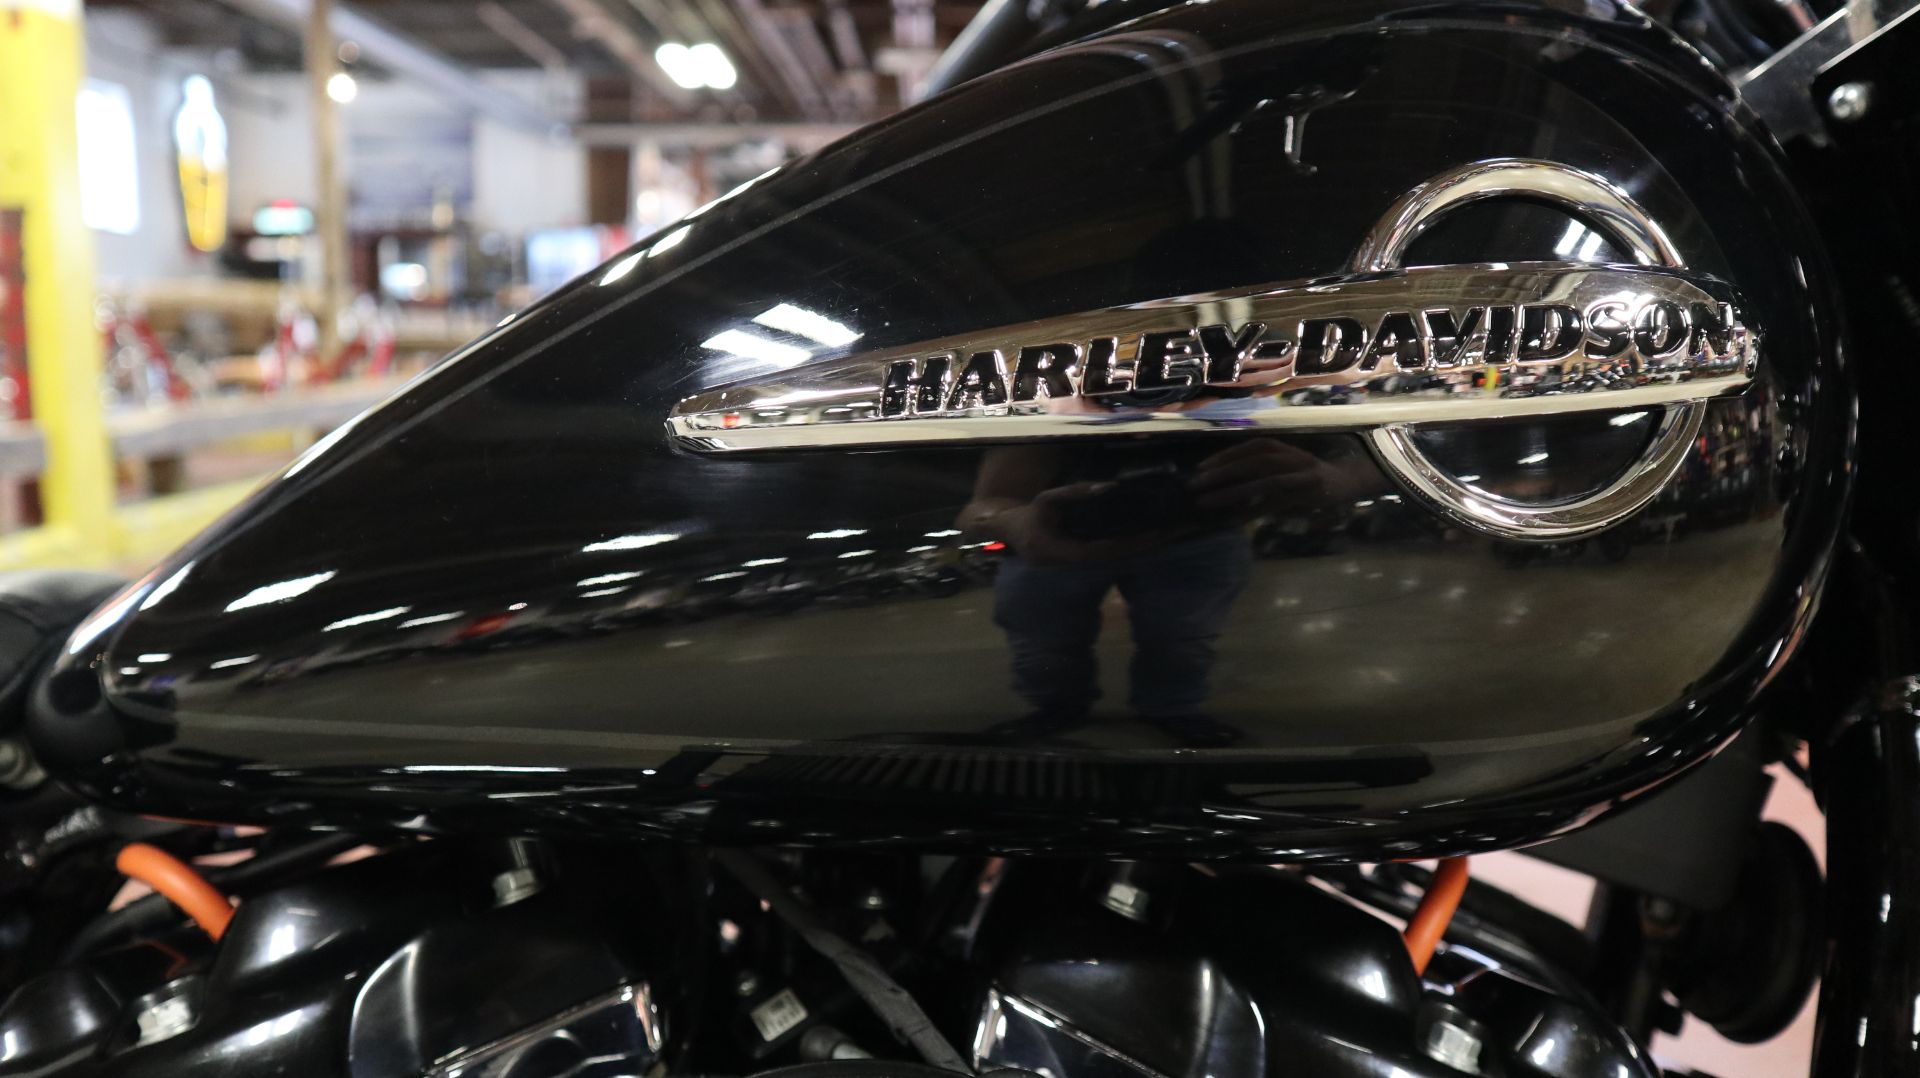 2019 Harley-Davidson Heritage Classic 107 in New London, Connecticut - Photo 9